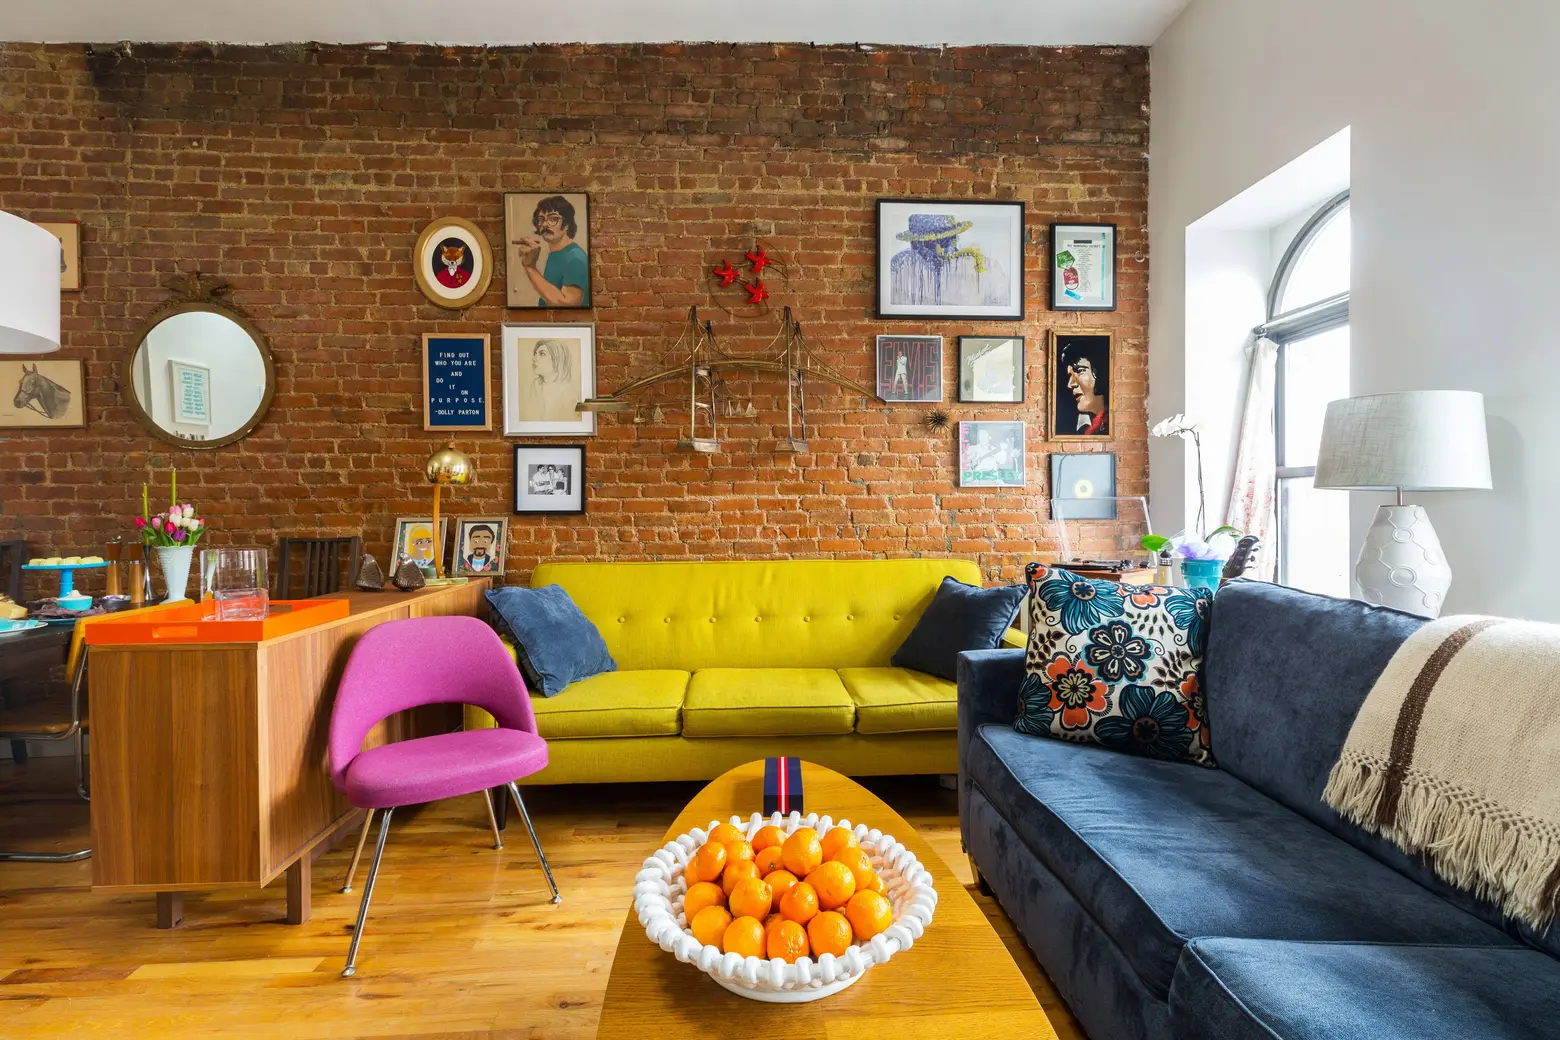 Our 900sqft: Native New Yorkers Aria and John open up their retro, colorful Harlem home